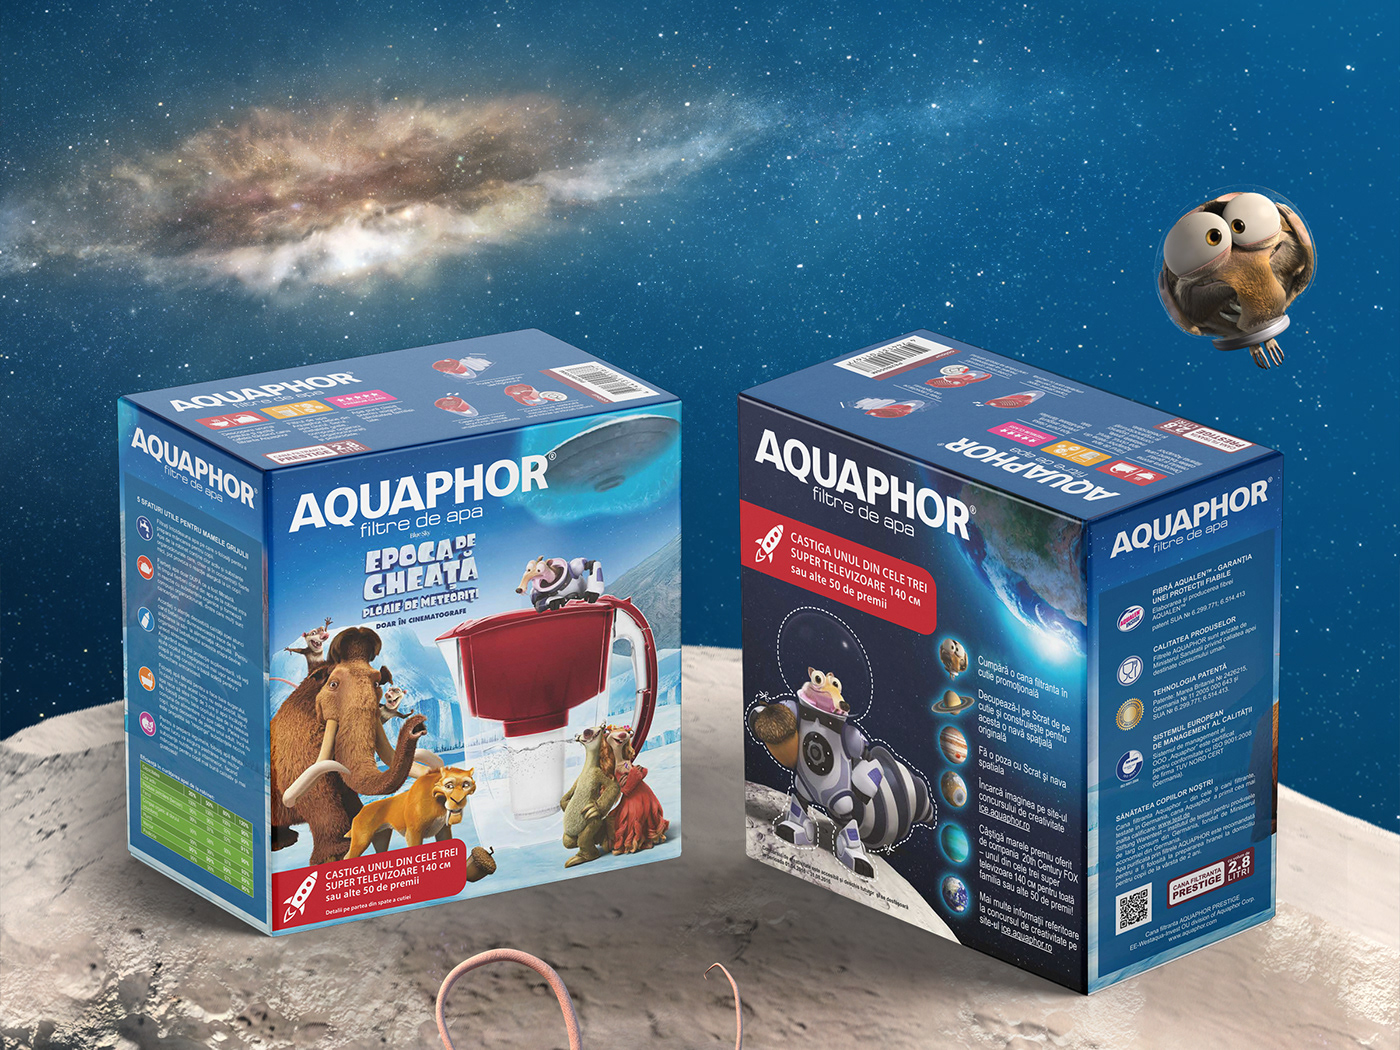 Ice Age characters on the packaging of Aquaphor water filters.
